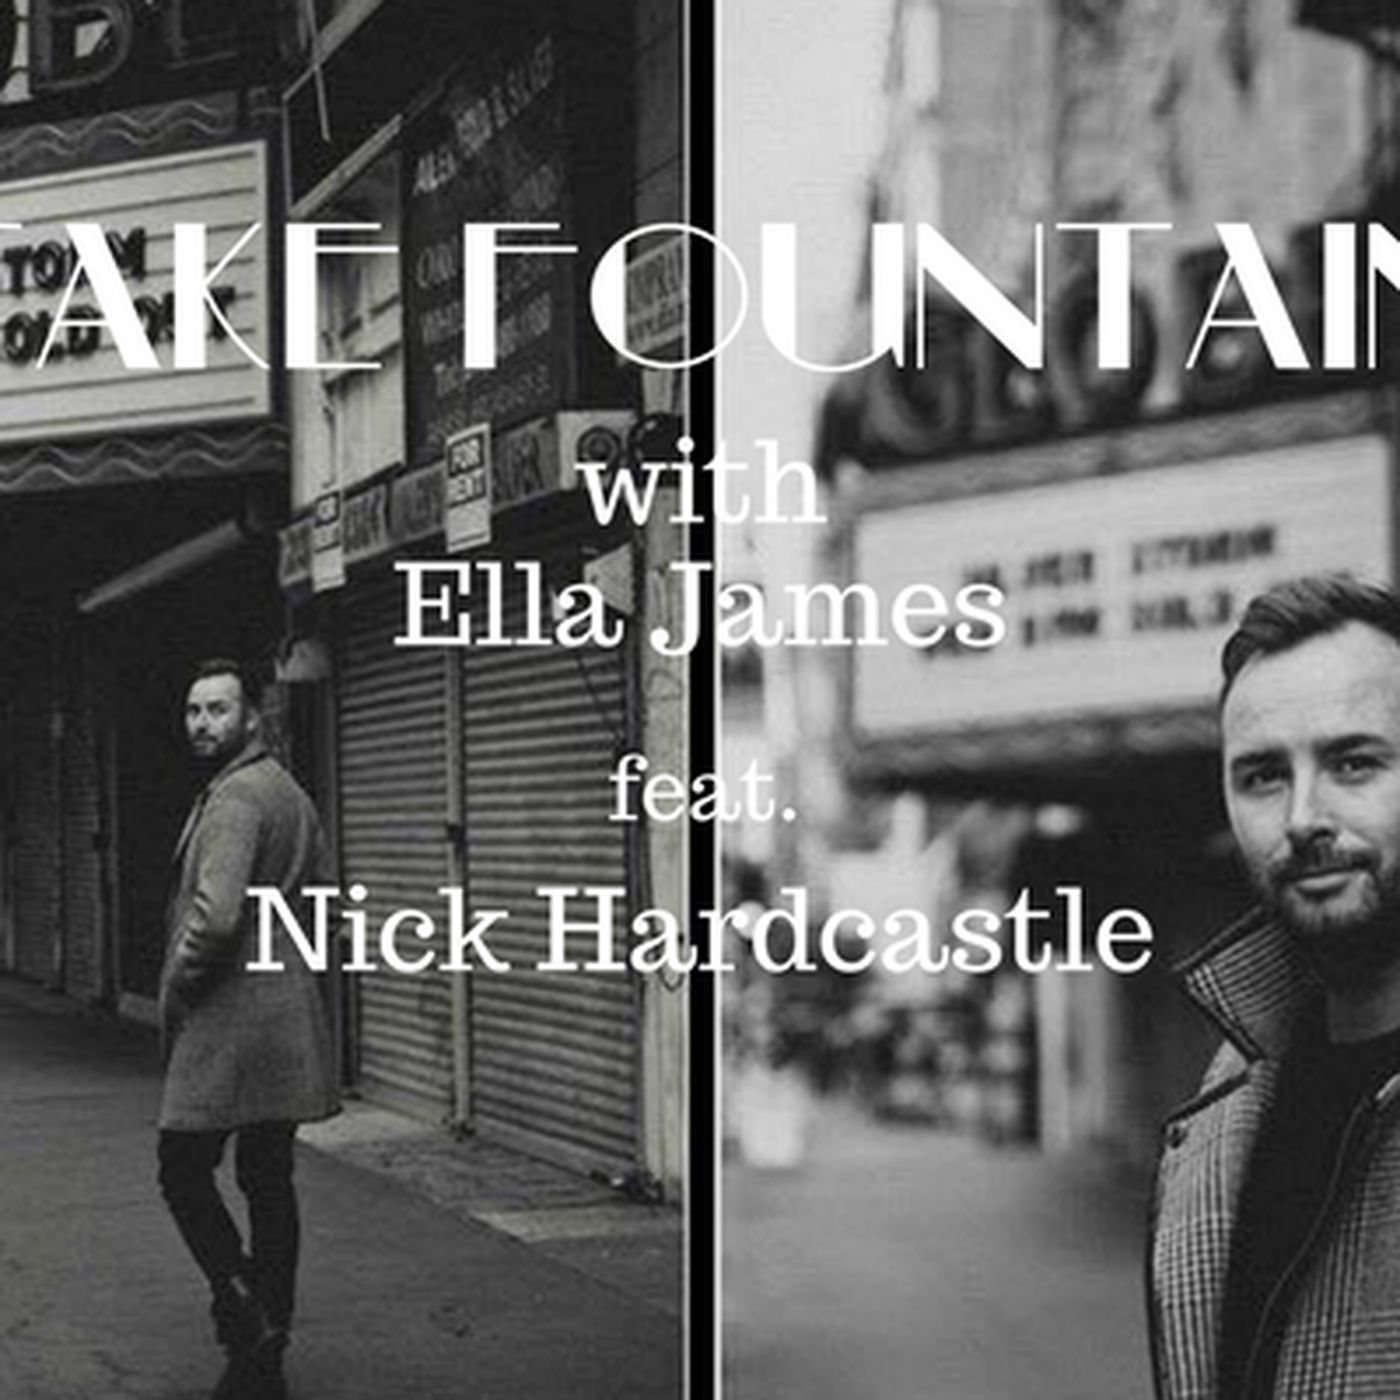 13: A conversation with Nick Hardcastle - Take Fountain with Ella James Episode 12